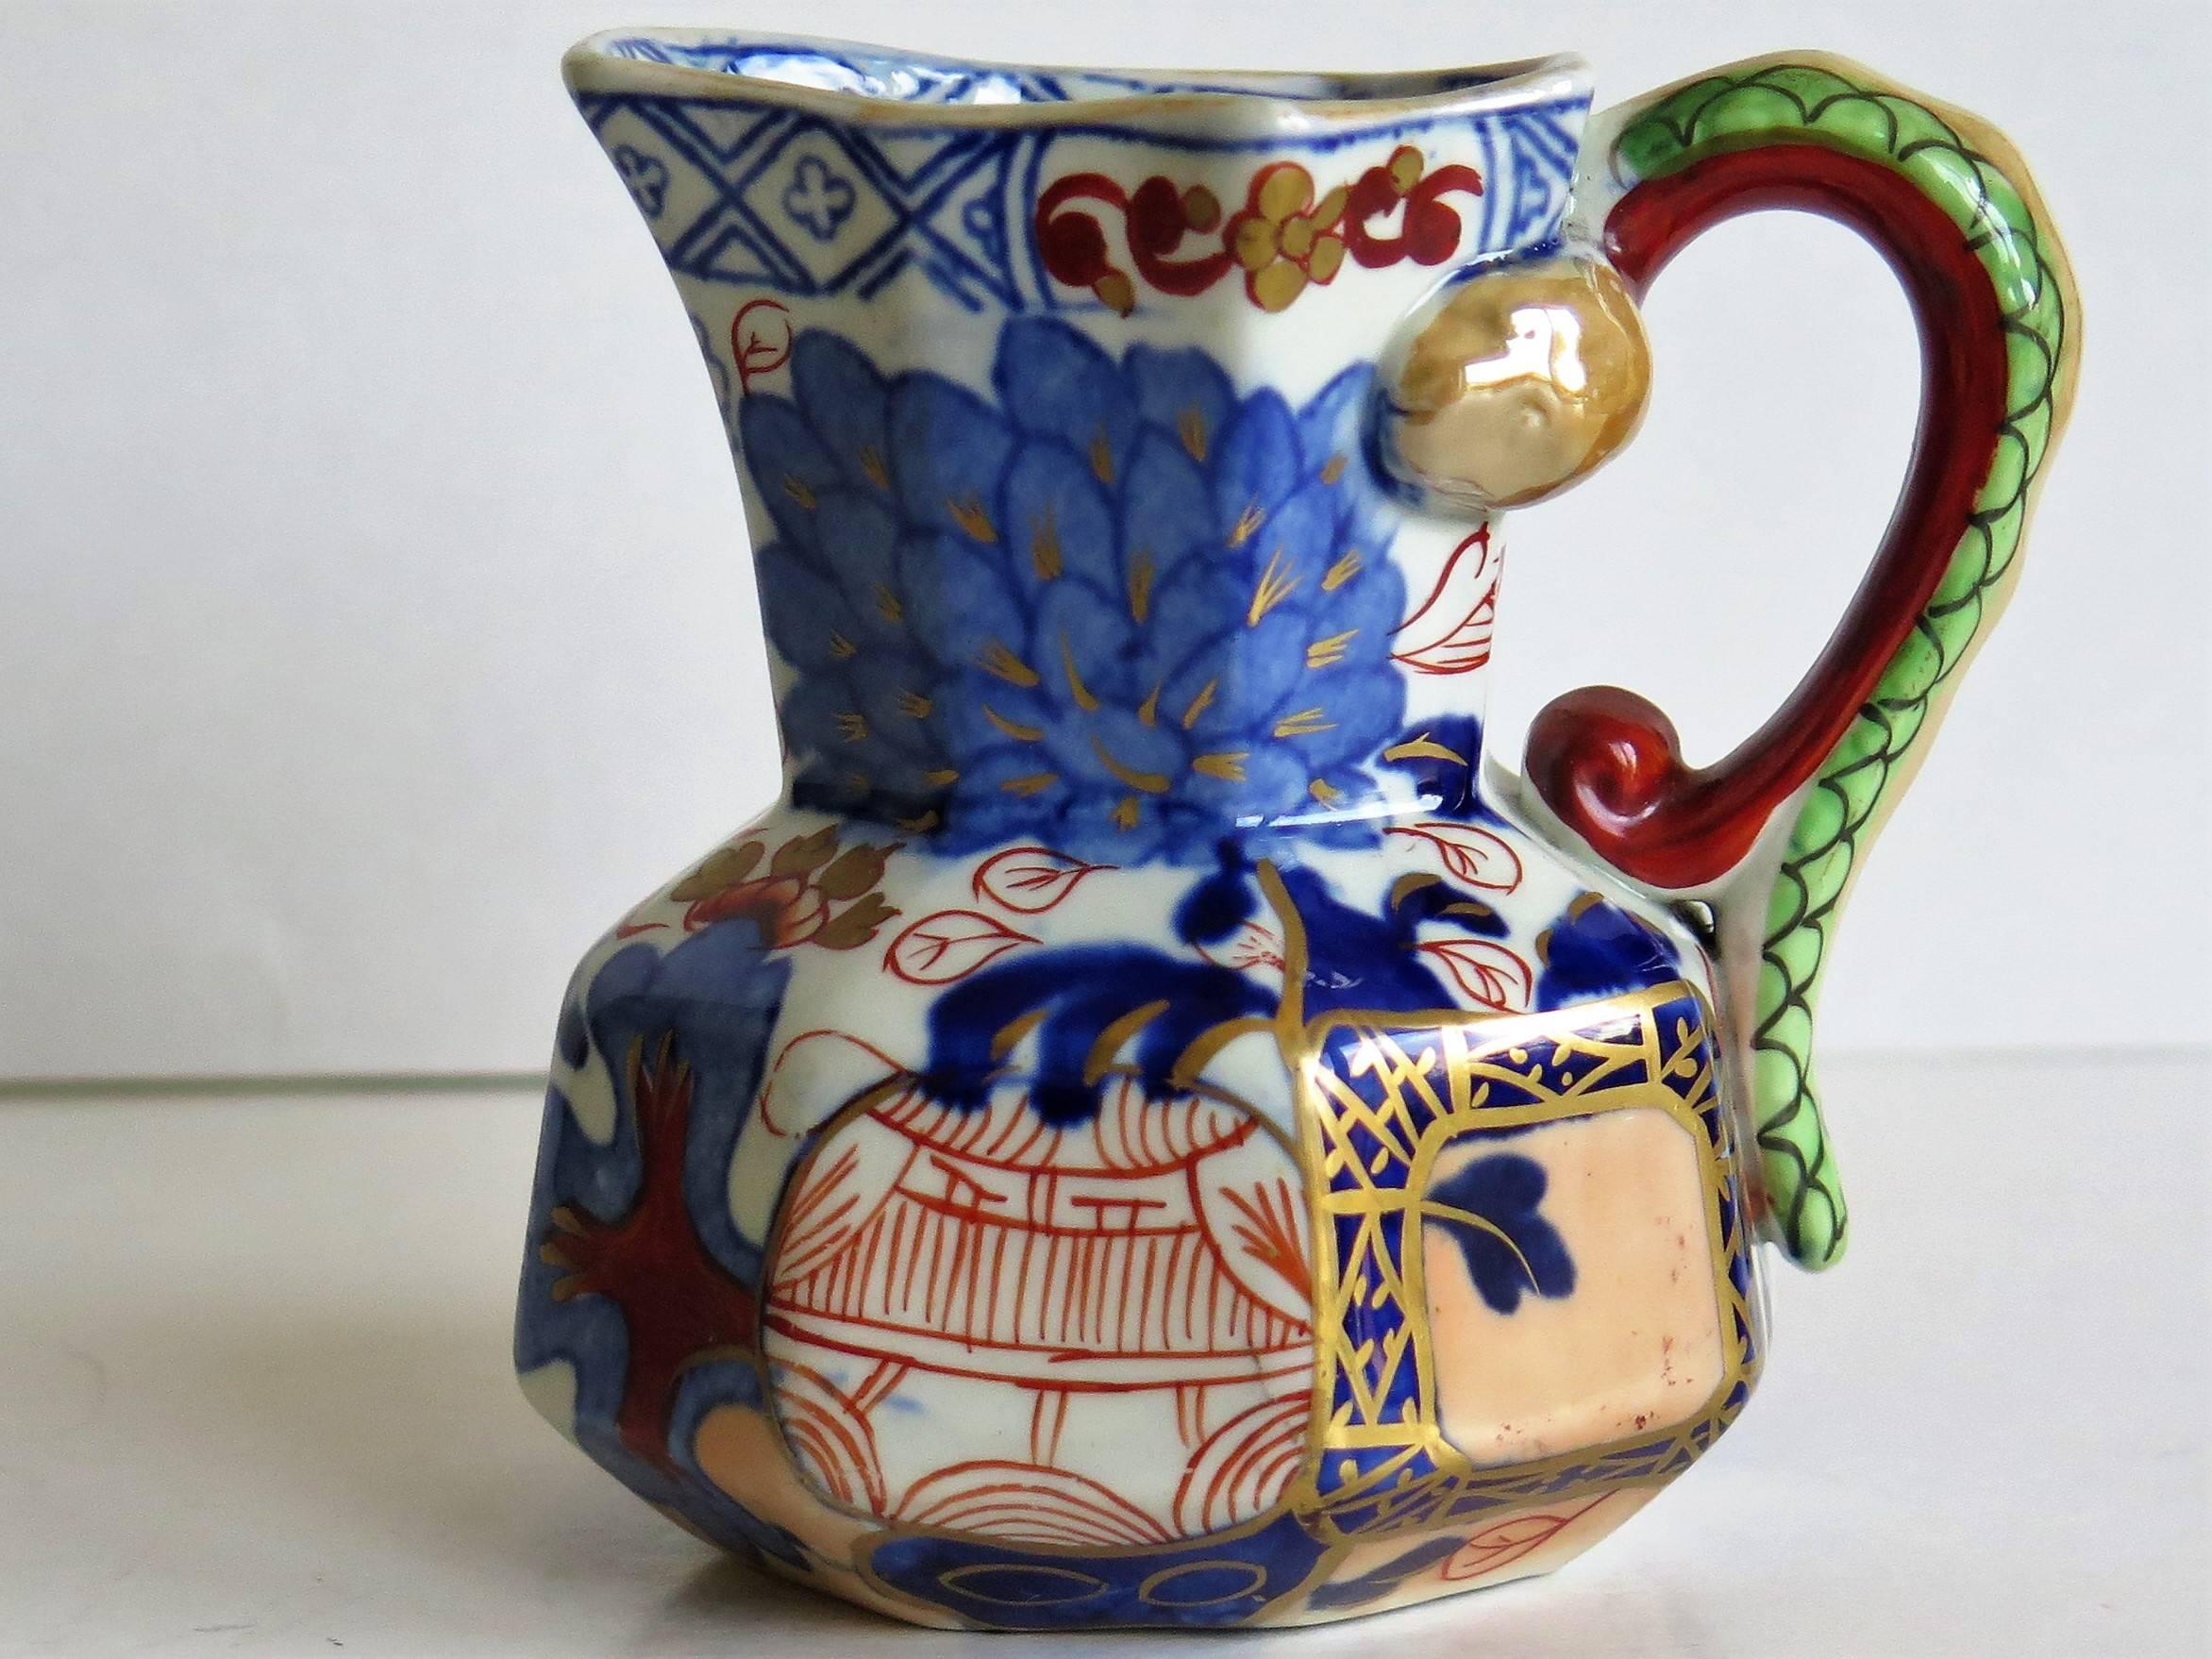 This is a good small Hydra jug, pitcher or cream jug made by the Davenport Company of Longport, Staffordshire, England in the late Georgian period, circa 1805-1820, made of Ironstone pottery, which Davenport called Stone China.

This is a very